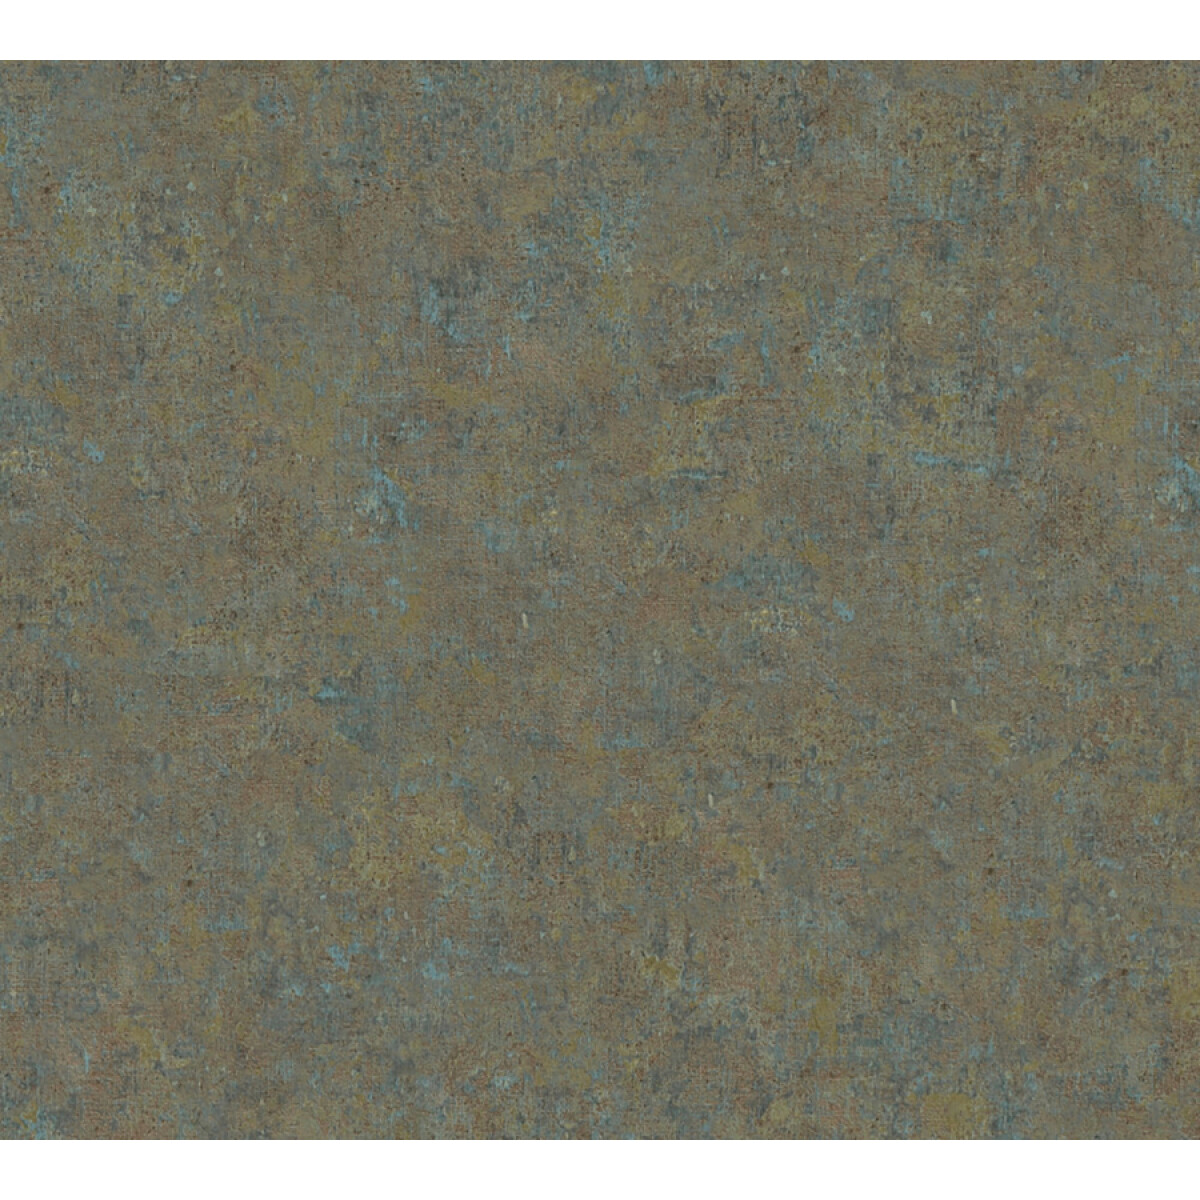 COLECCION WINDSONG - RYU MULTICOLOR CEMENT TEXTURE - 